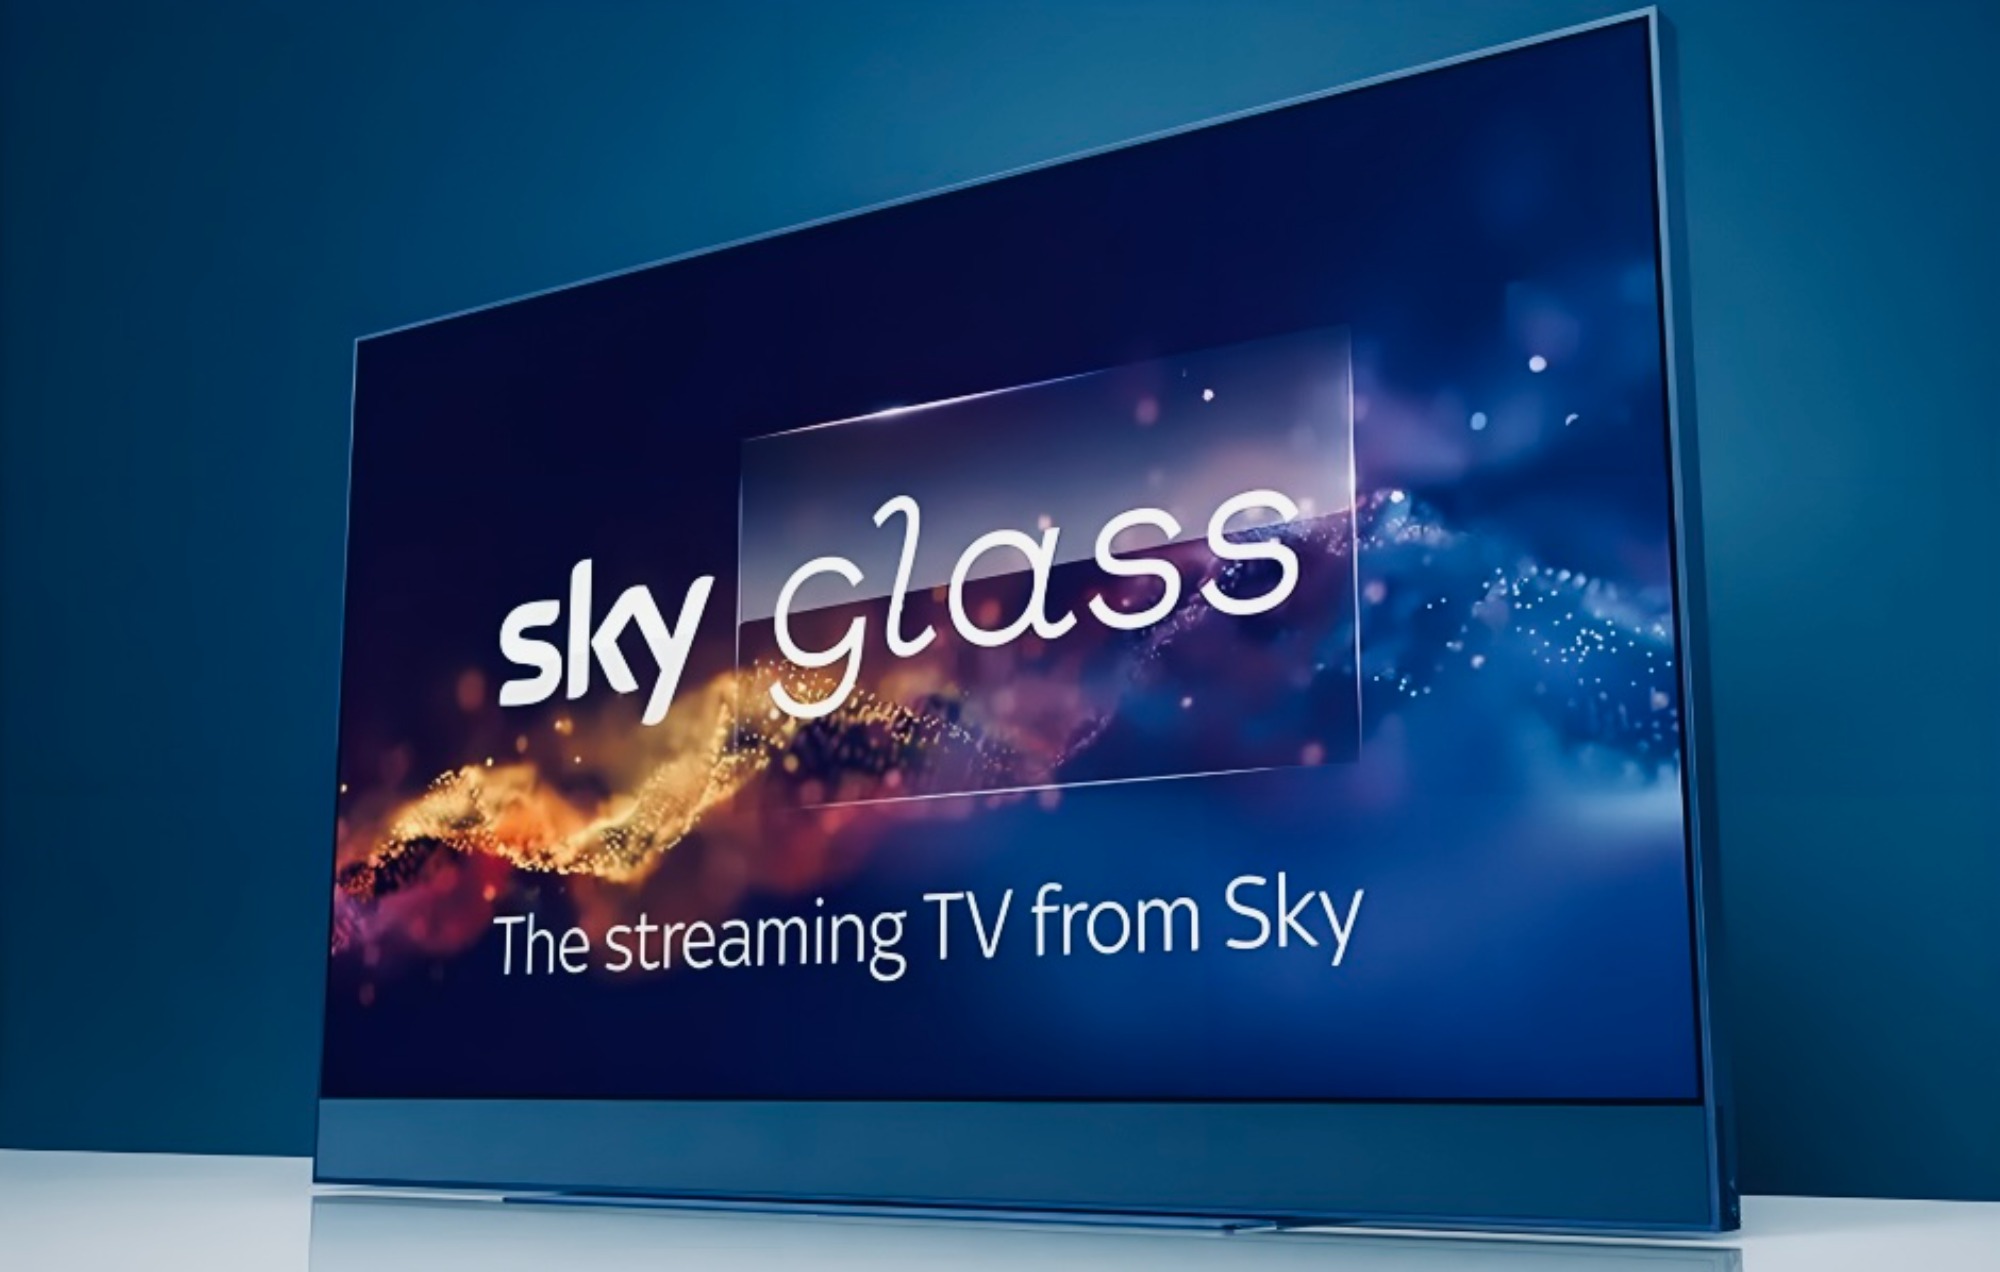 Sky deal offers 3 months of free Sky TV and Netflix with ‘game-changer’ Glass this April